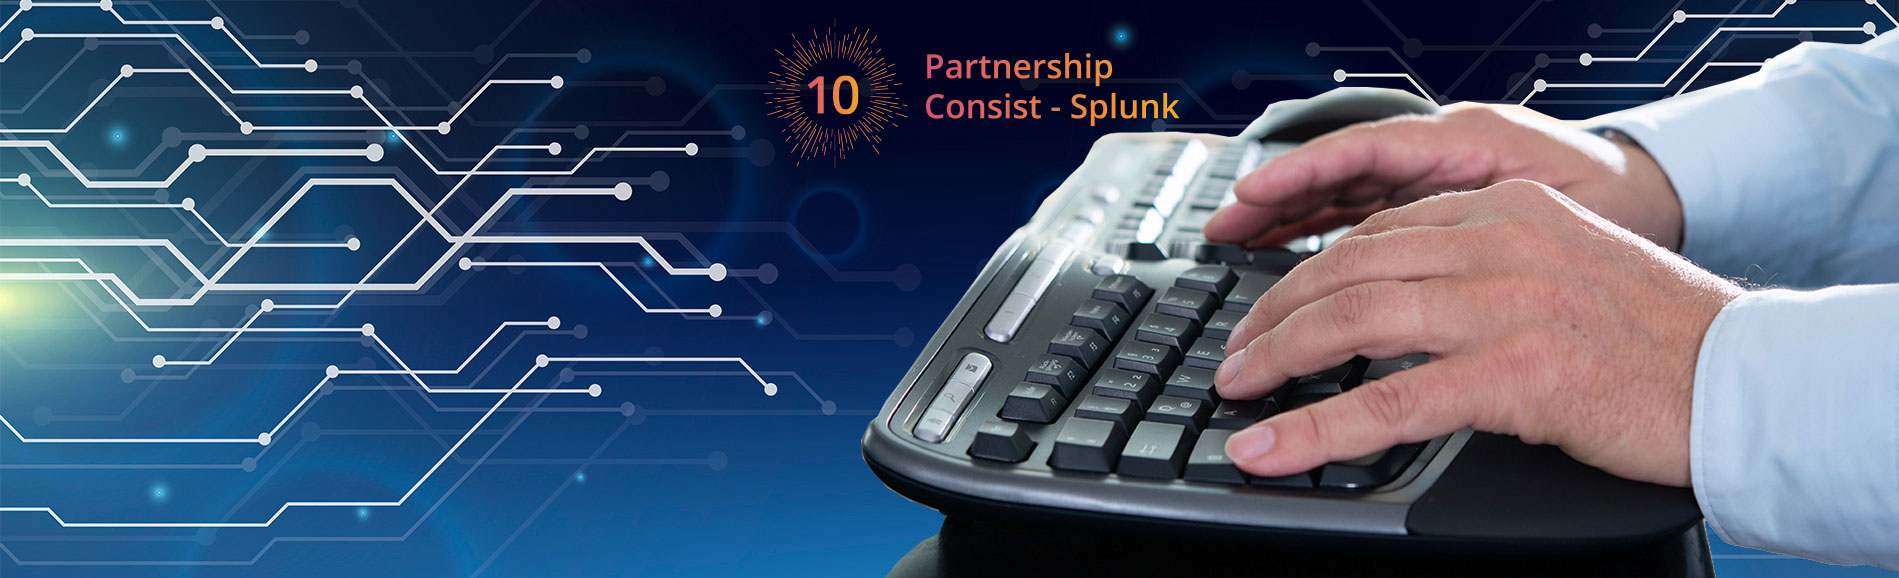 Consist celebrates 10 years of partnership with Splunk.